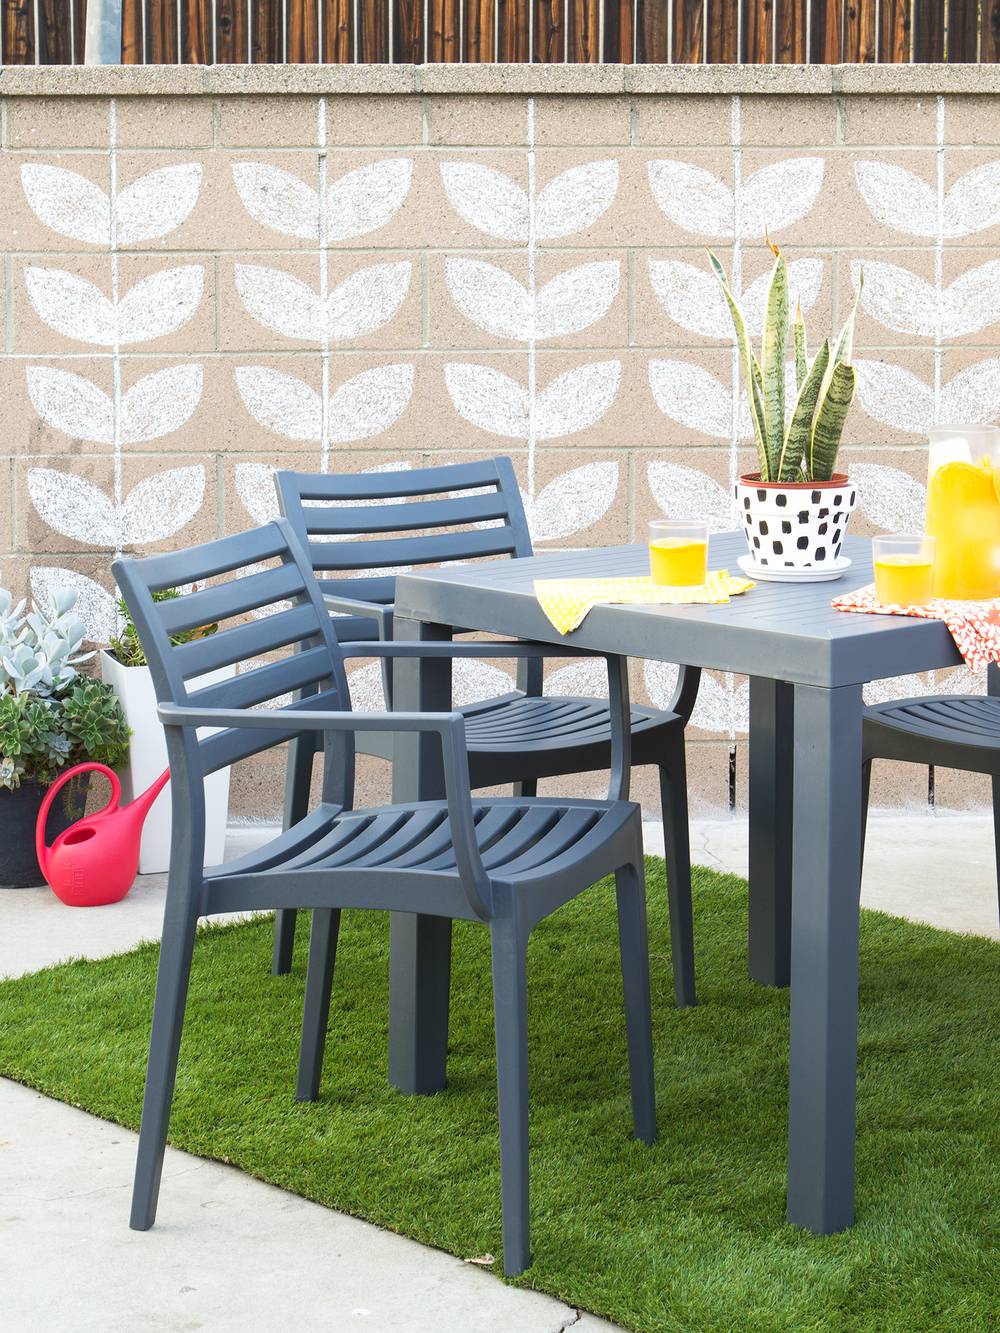 patios with a spring vibe